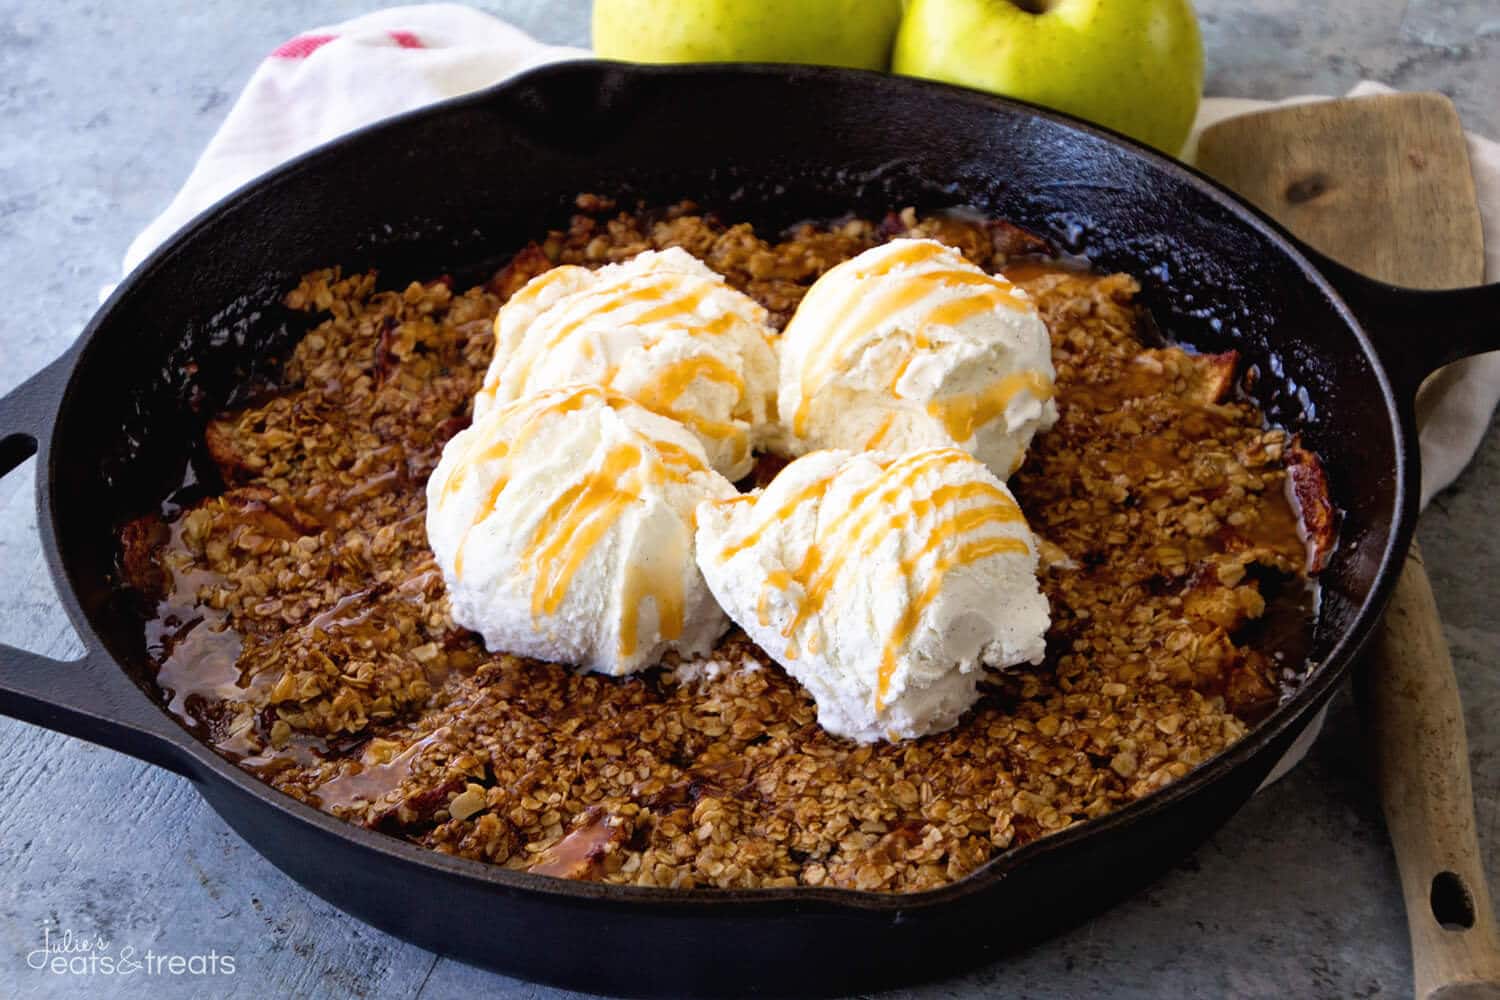 Grilled Caramel Apple Crisp ~ Enjoy Your Favorite Dessert on the Grill! Tender, Juicy Apples with Caramel Topped with Butter, Oatmeal and Ice Cream!